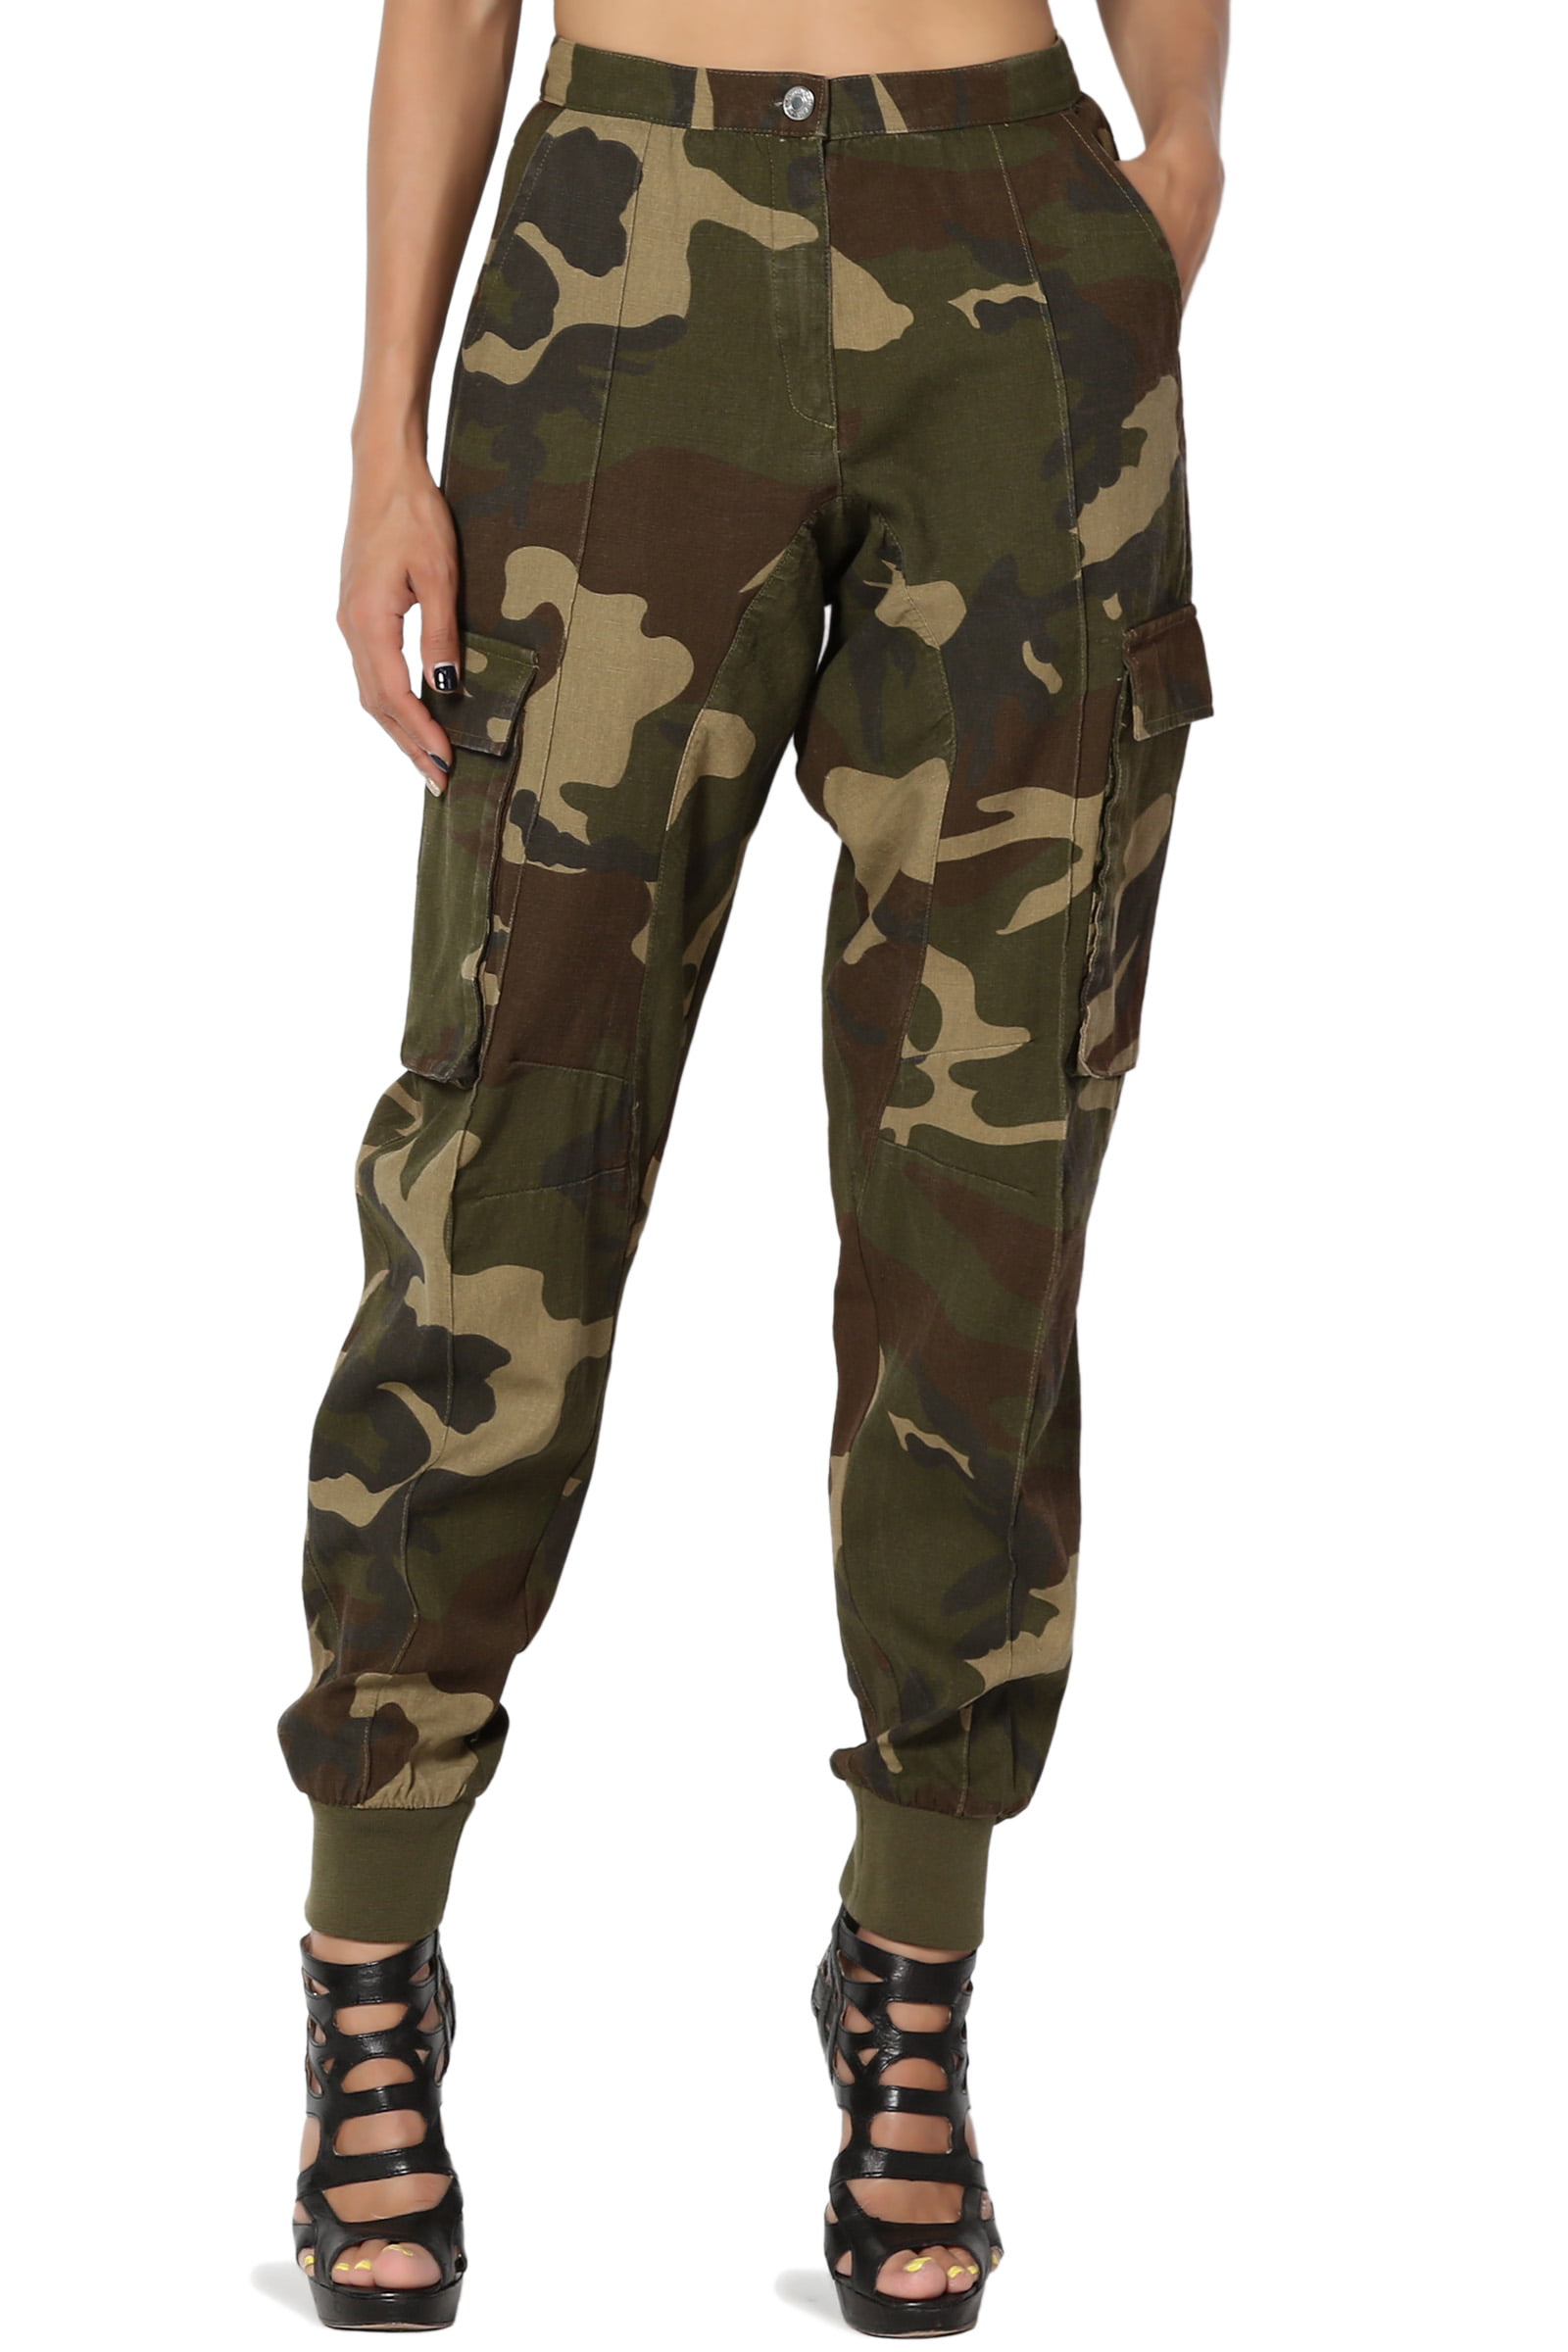 Themogan Women S Camo Print High Waist Relaxed Fit Slouchy Twill Cargo Pants